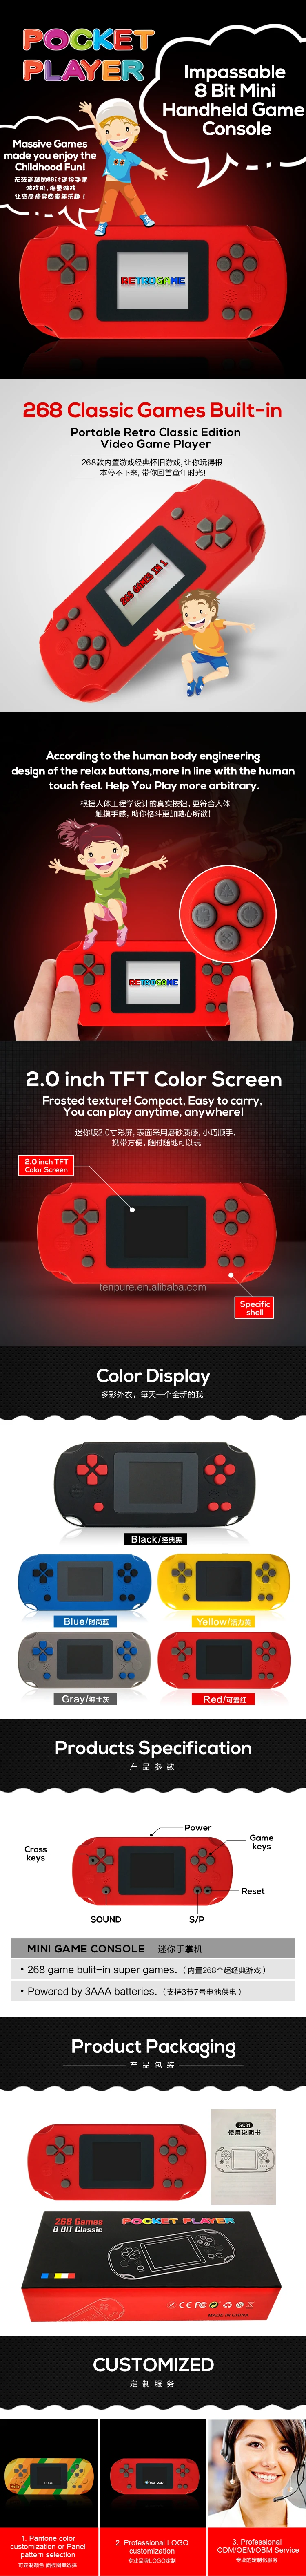 8 Bit 2 Inch Mini Game Console Built in 268 Games Controller Pocket Gamepad For Kids Christmas Handheld Game Console Retro